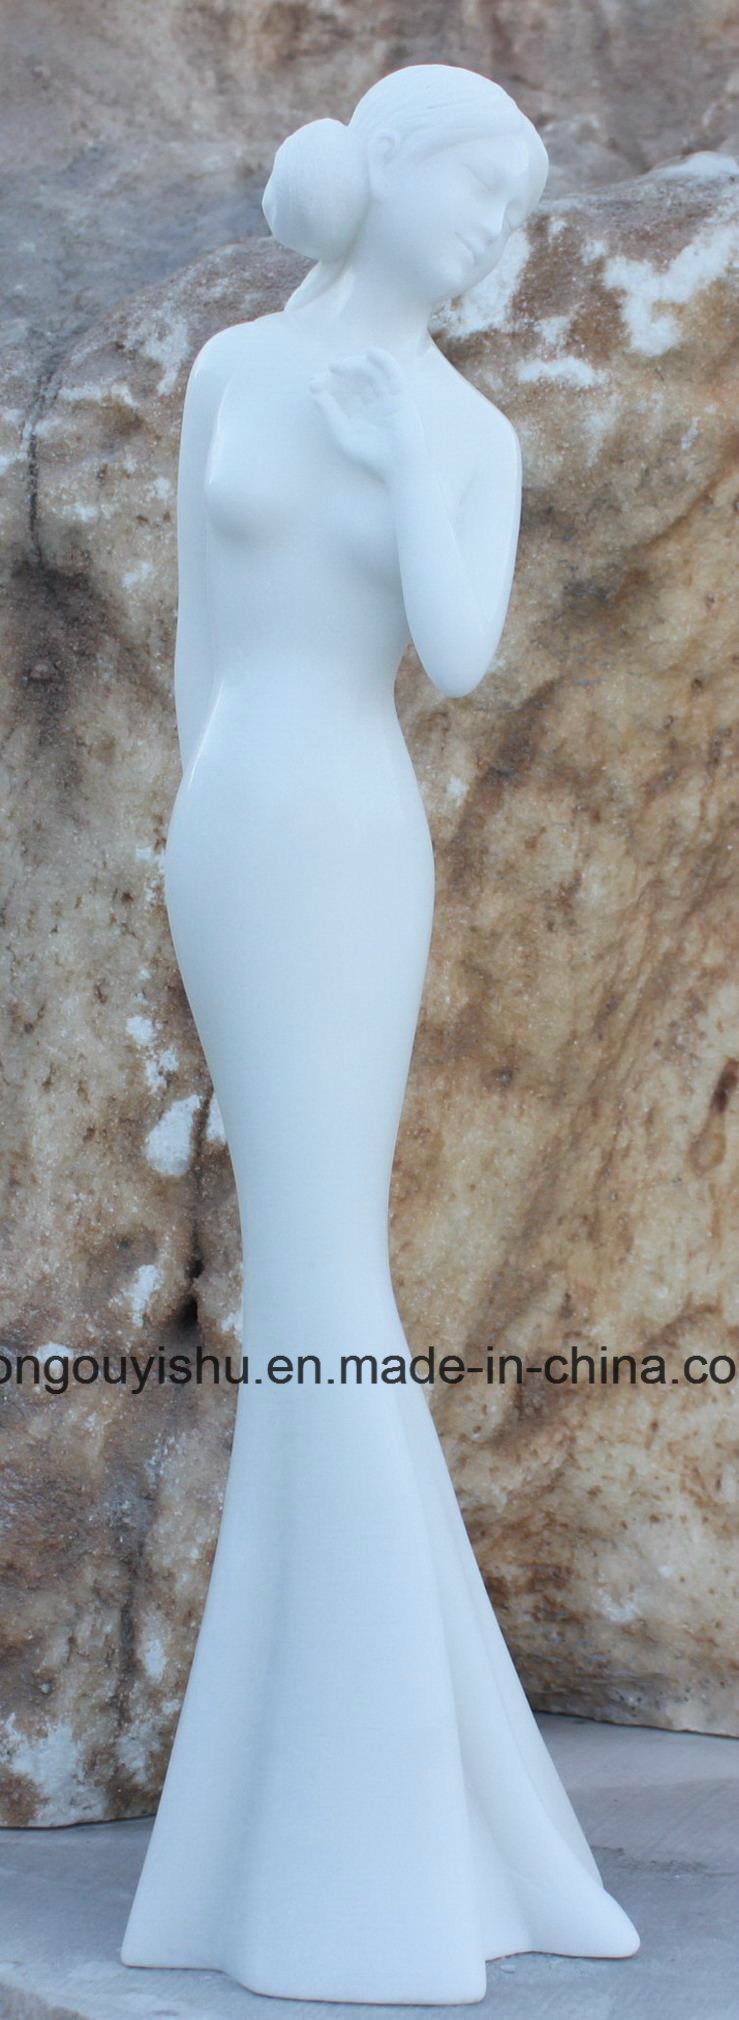 Great Quality with Cheap Price of White Lady Statue of Mabrle Sculpture